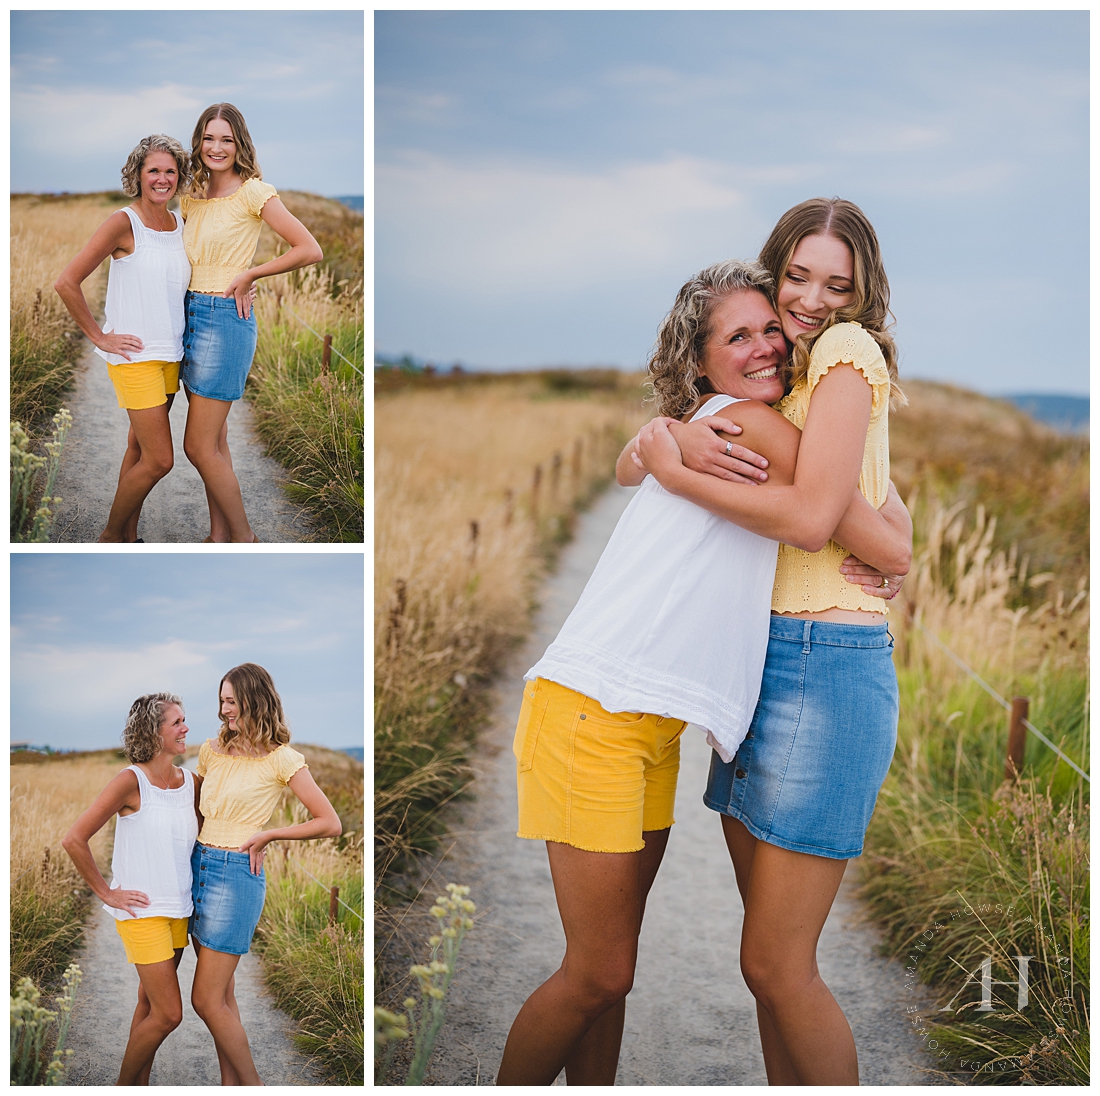 Mother-Daughter Senior Portrait Moment | Cute Family Photo Inspiration, Mother and Daughter by Waterfront | Photographed by the Best Tacoma Senior Photographer Amanda Howse Photography